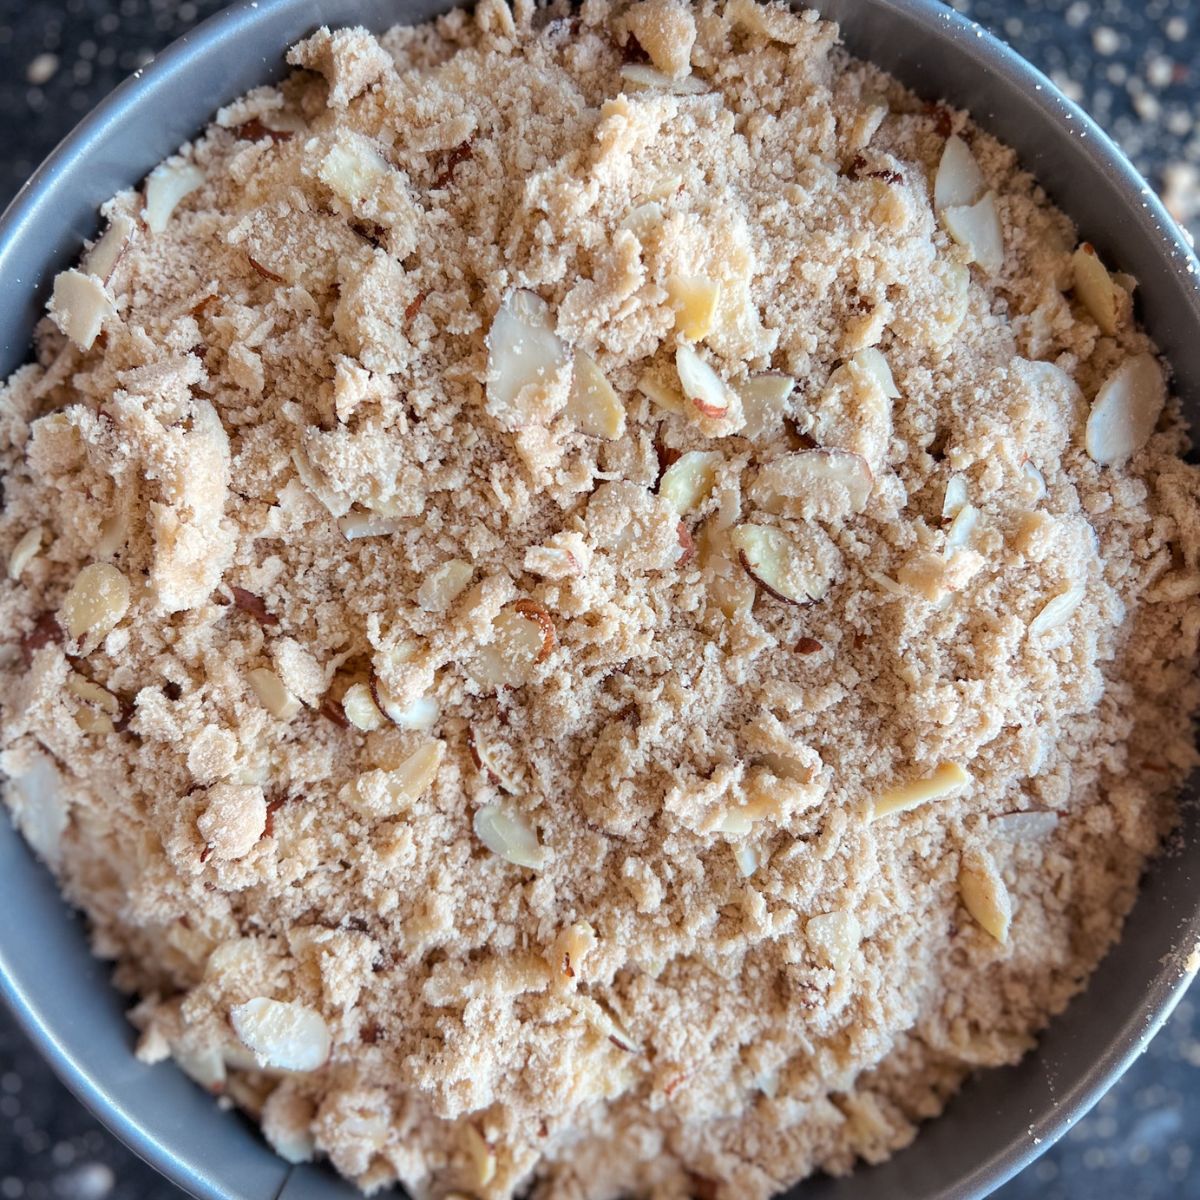 Unbaked almond coffee cake in the pan.